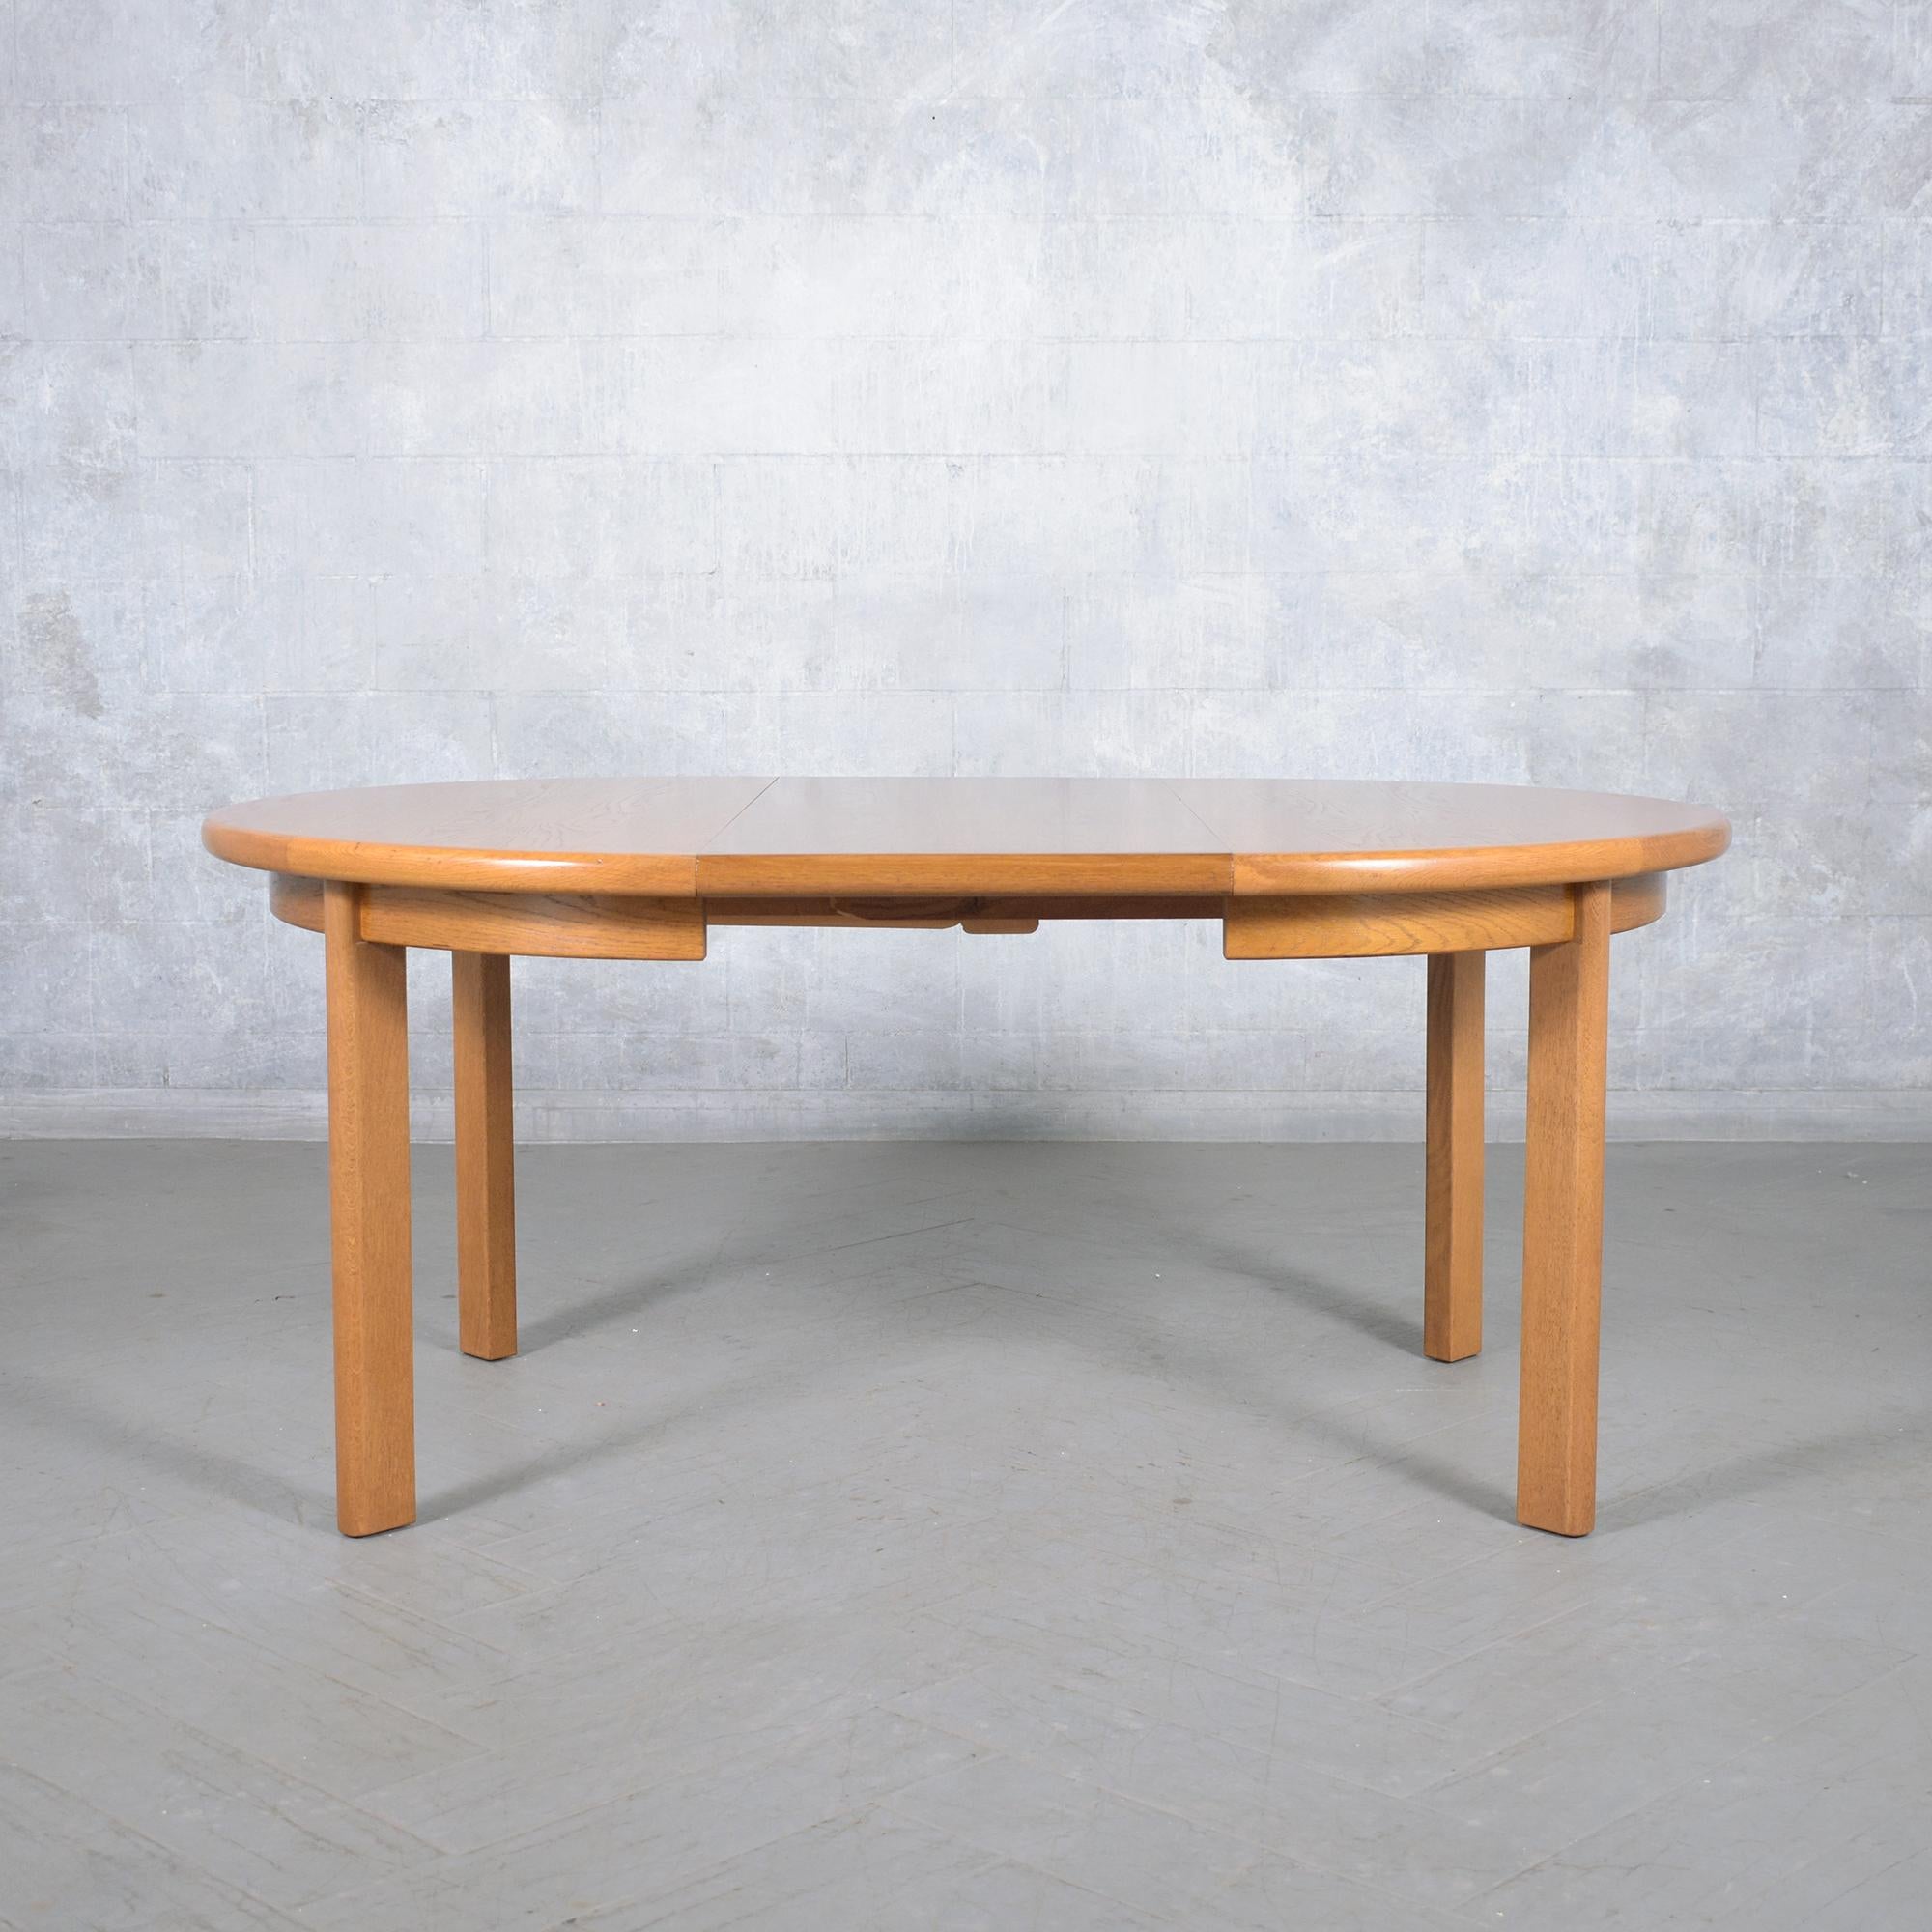 1970s Danish Modern Teak Dining Table with Extendable Leaves For Sale 10